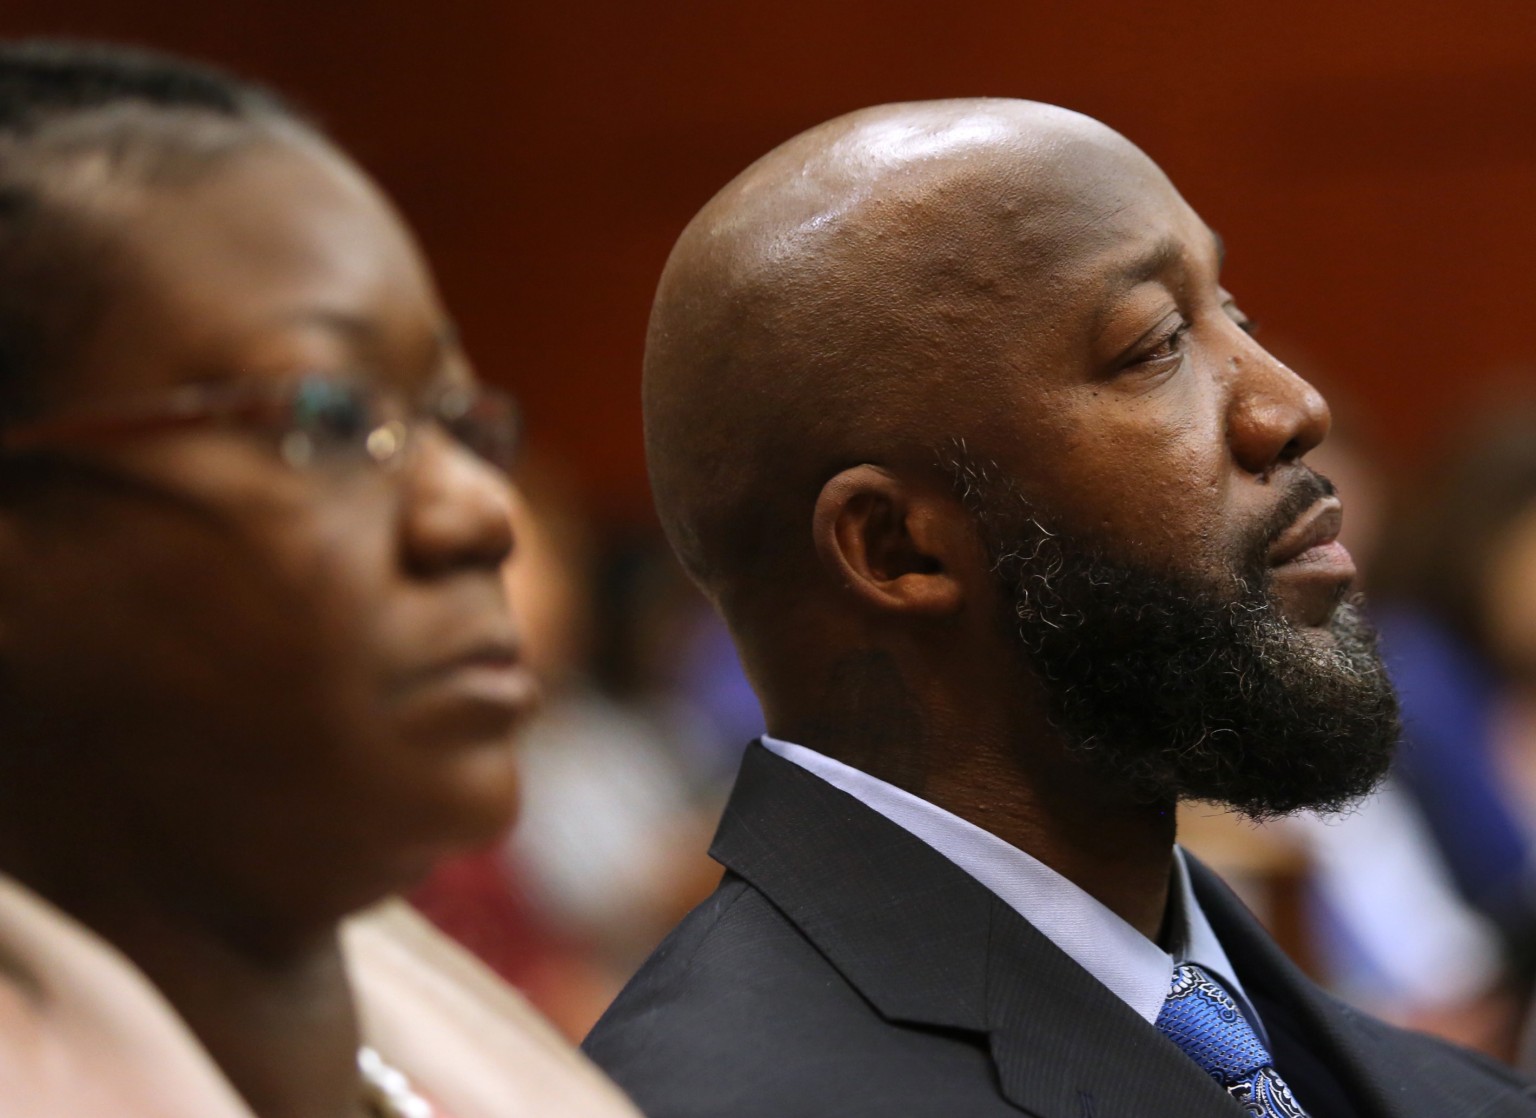 The parents of Trayvon Martin, Tracy Martin, right, and Sybrina Fulton, listen to the testimony of Sanford police officer Chris Serino during the George Zimmerman trial in Seminole Circuit Court, in Sanford, Fla., Monday, July  8, 2013. Zimmerman is charged with second-degree murder in the fatal shooting of Trayvon Martin, an unarmed teen, in 2012. (AP Photo/Orlando Sentinel, Joe Burbank, Pool)